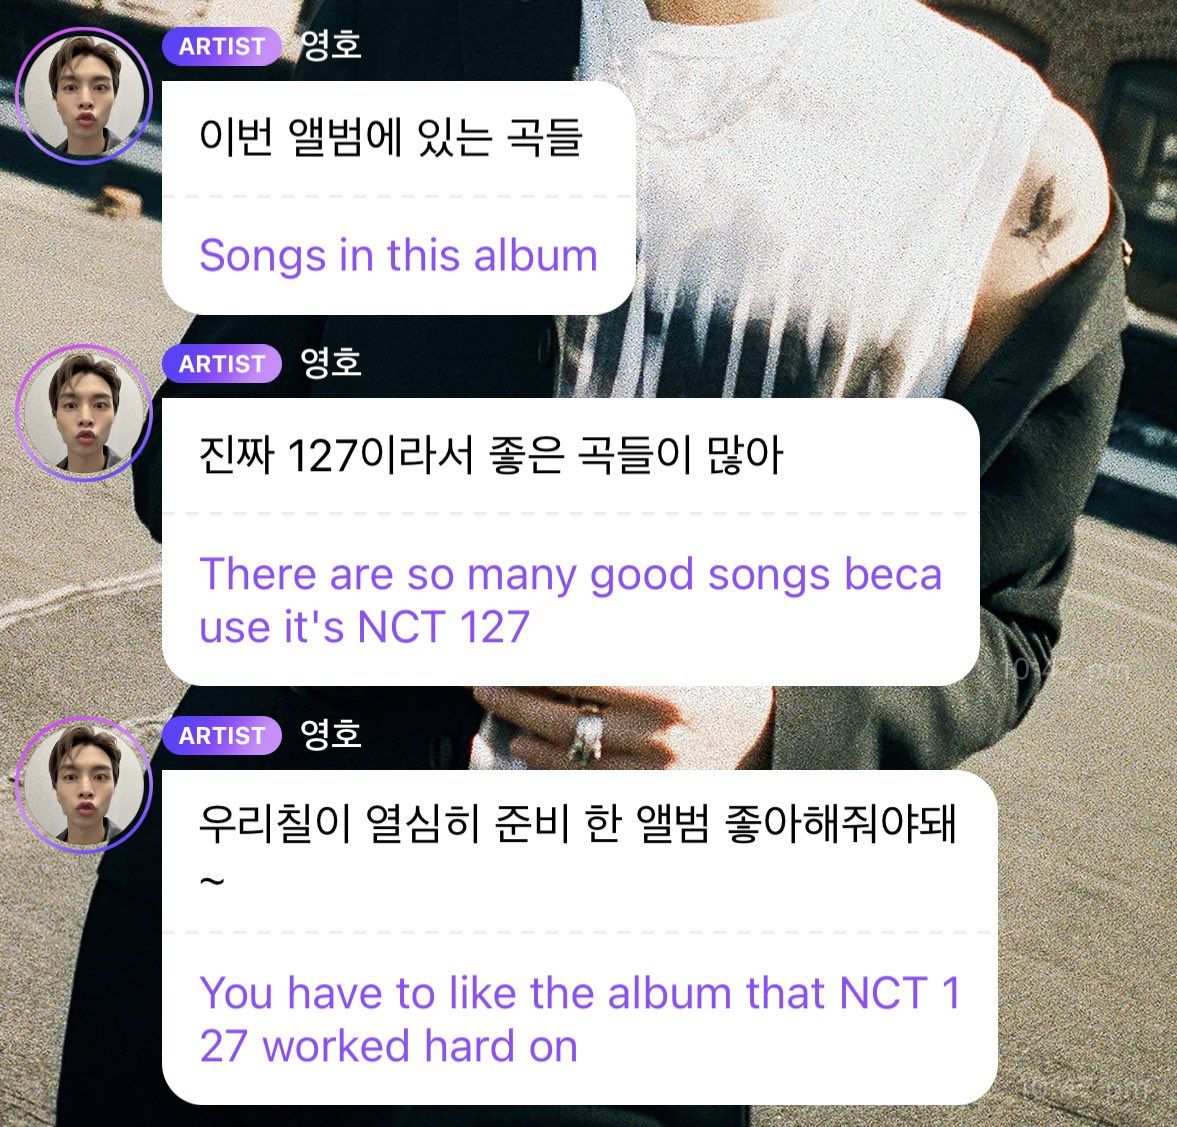 NCT 127 Lyrics, Songs, and Albums